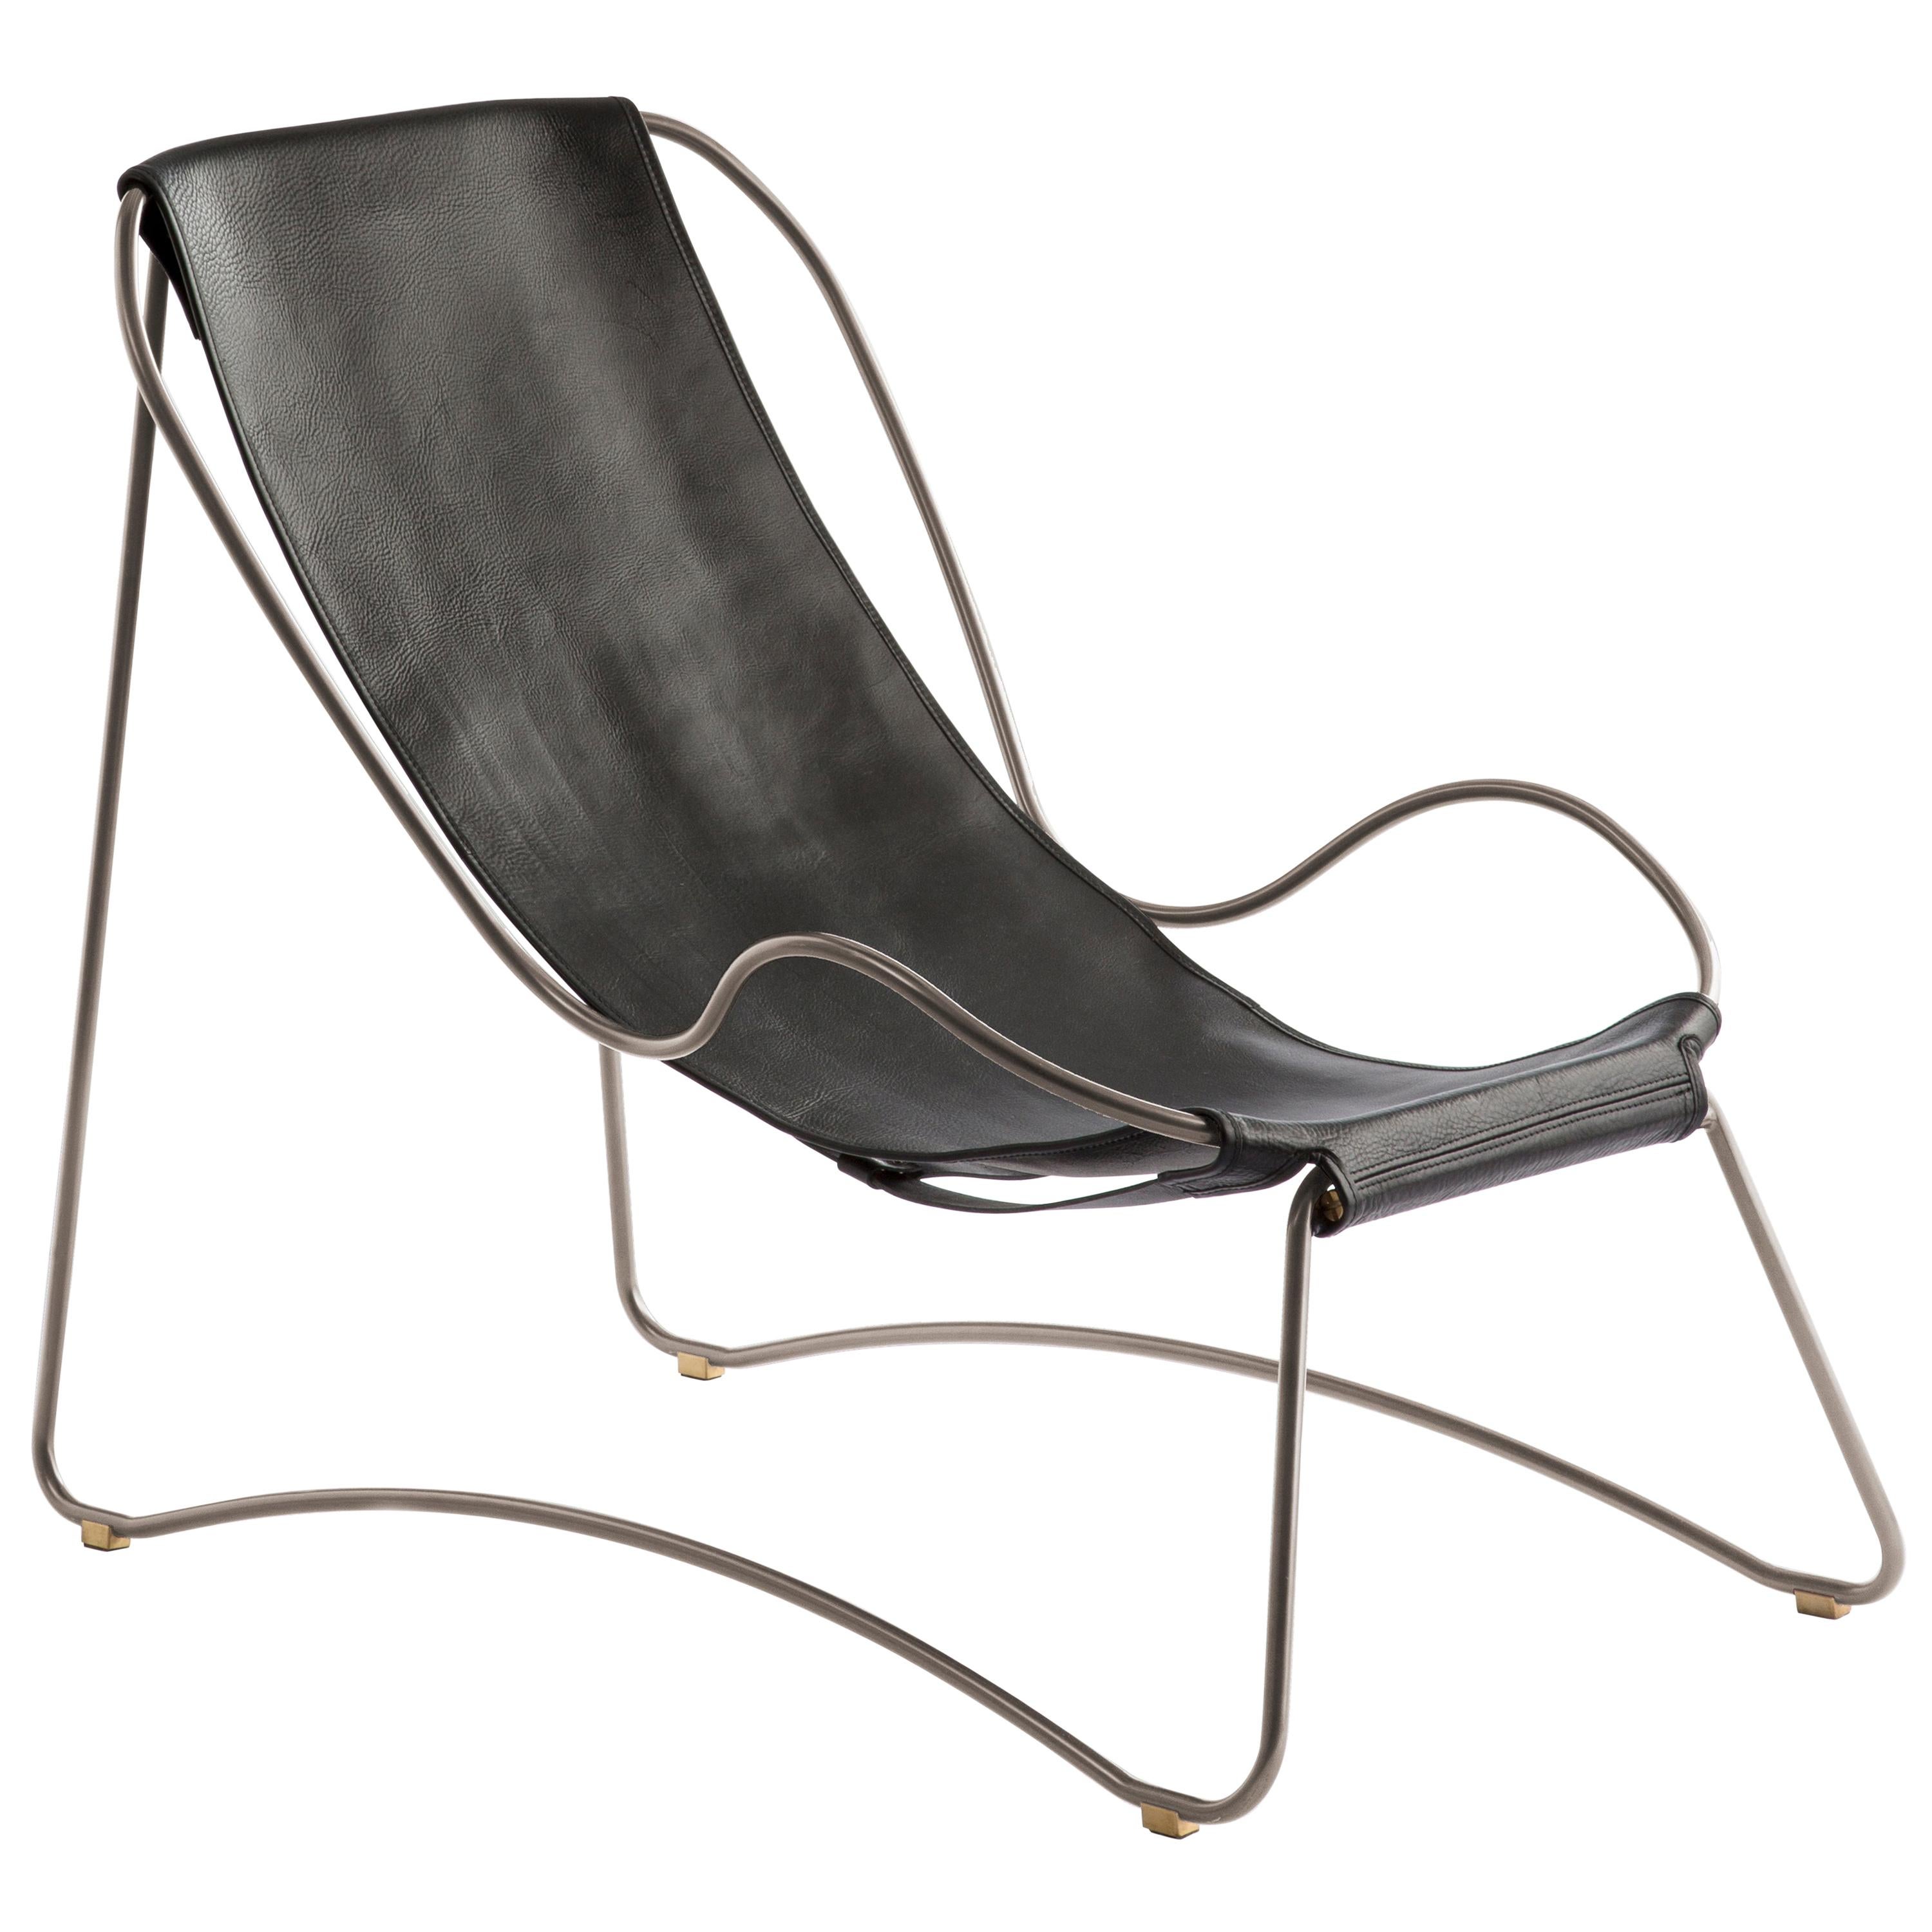 Sculptural Contemporary Artisan Chaise Lounge Old Silver Metal & Black Leather